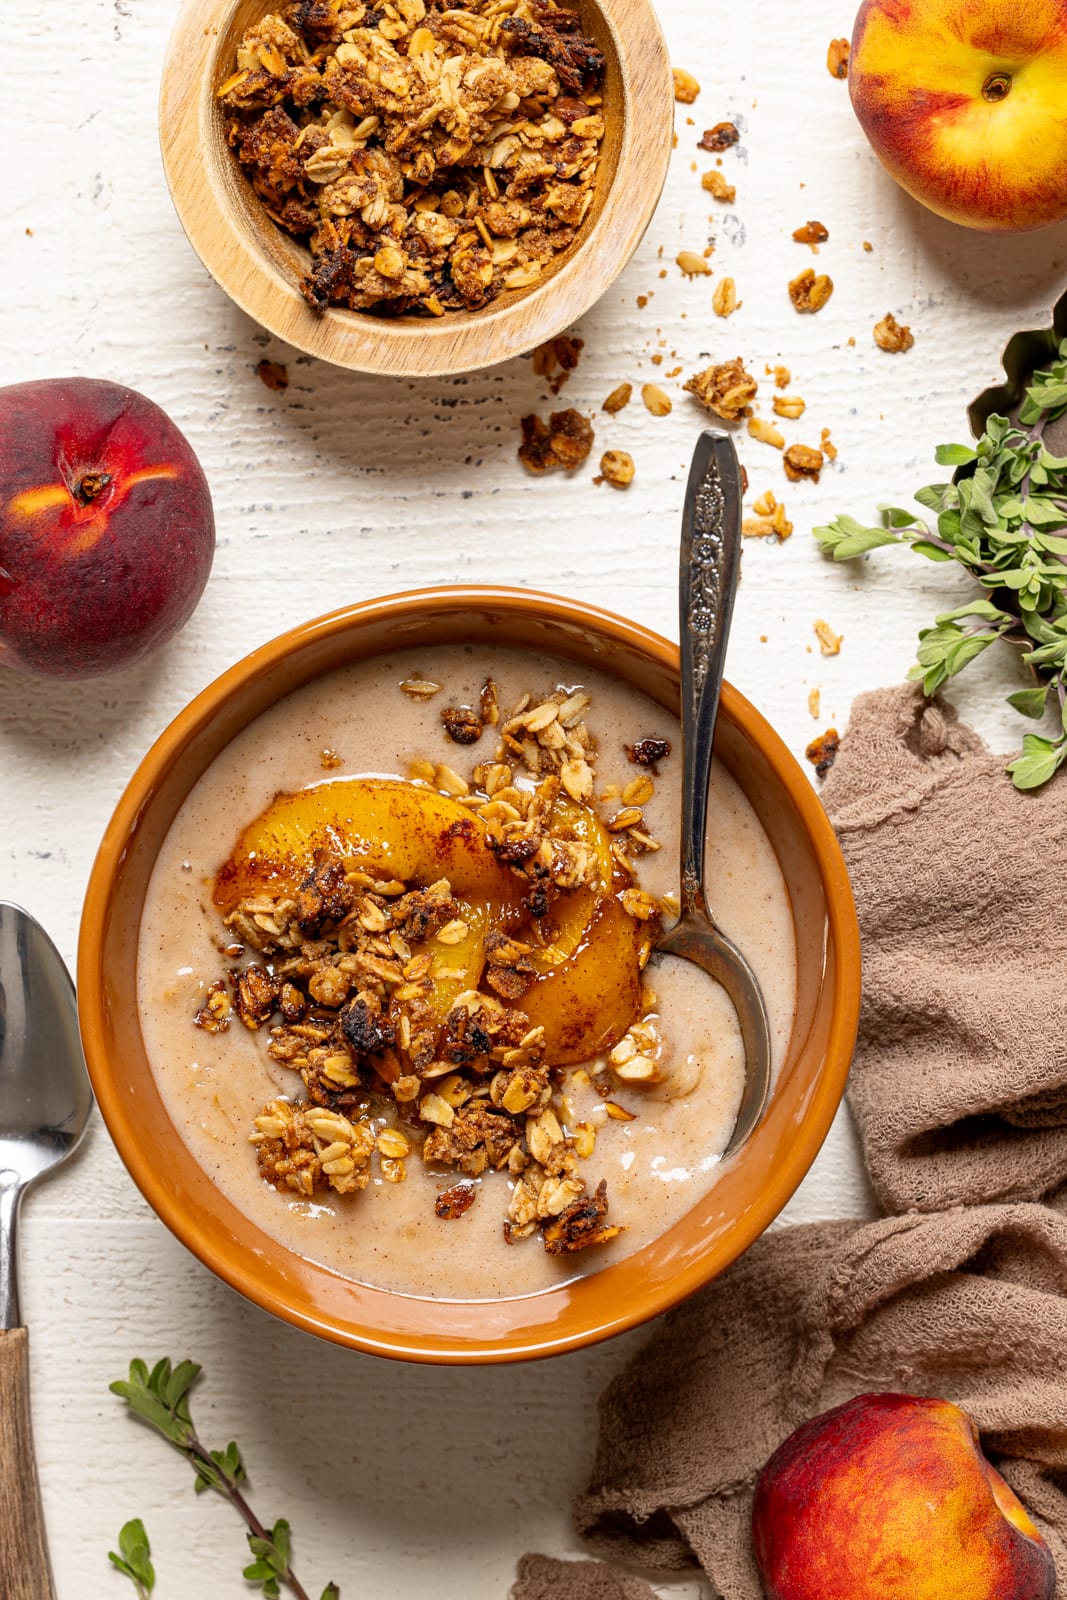 Bowl of porridge with a spoon, peaches, granola, and a side spoon.